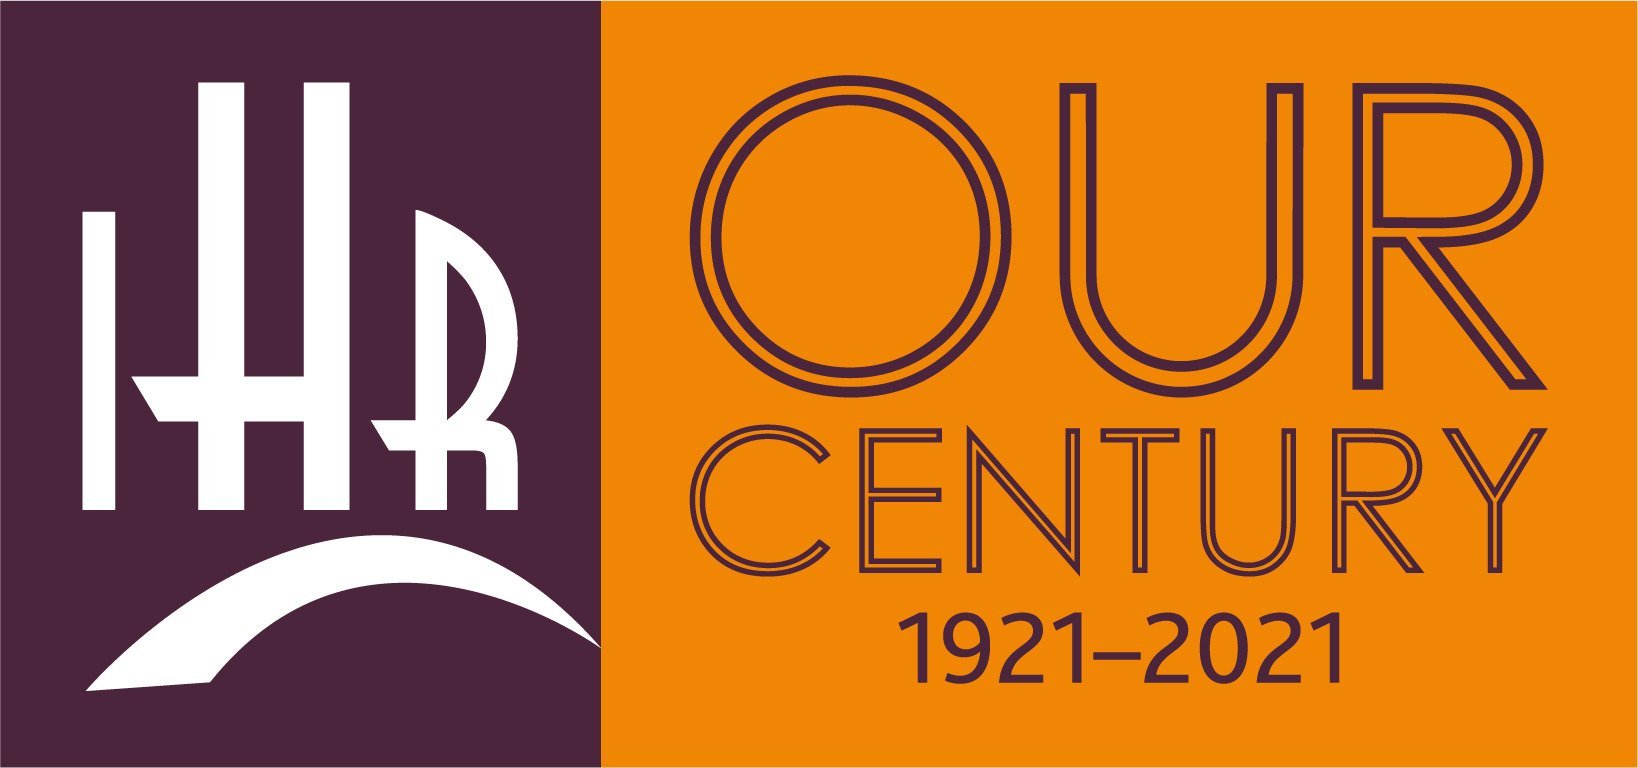 Institute for Historical Research Our Century 1921-2021 logo